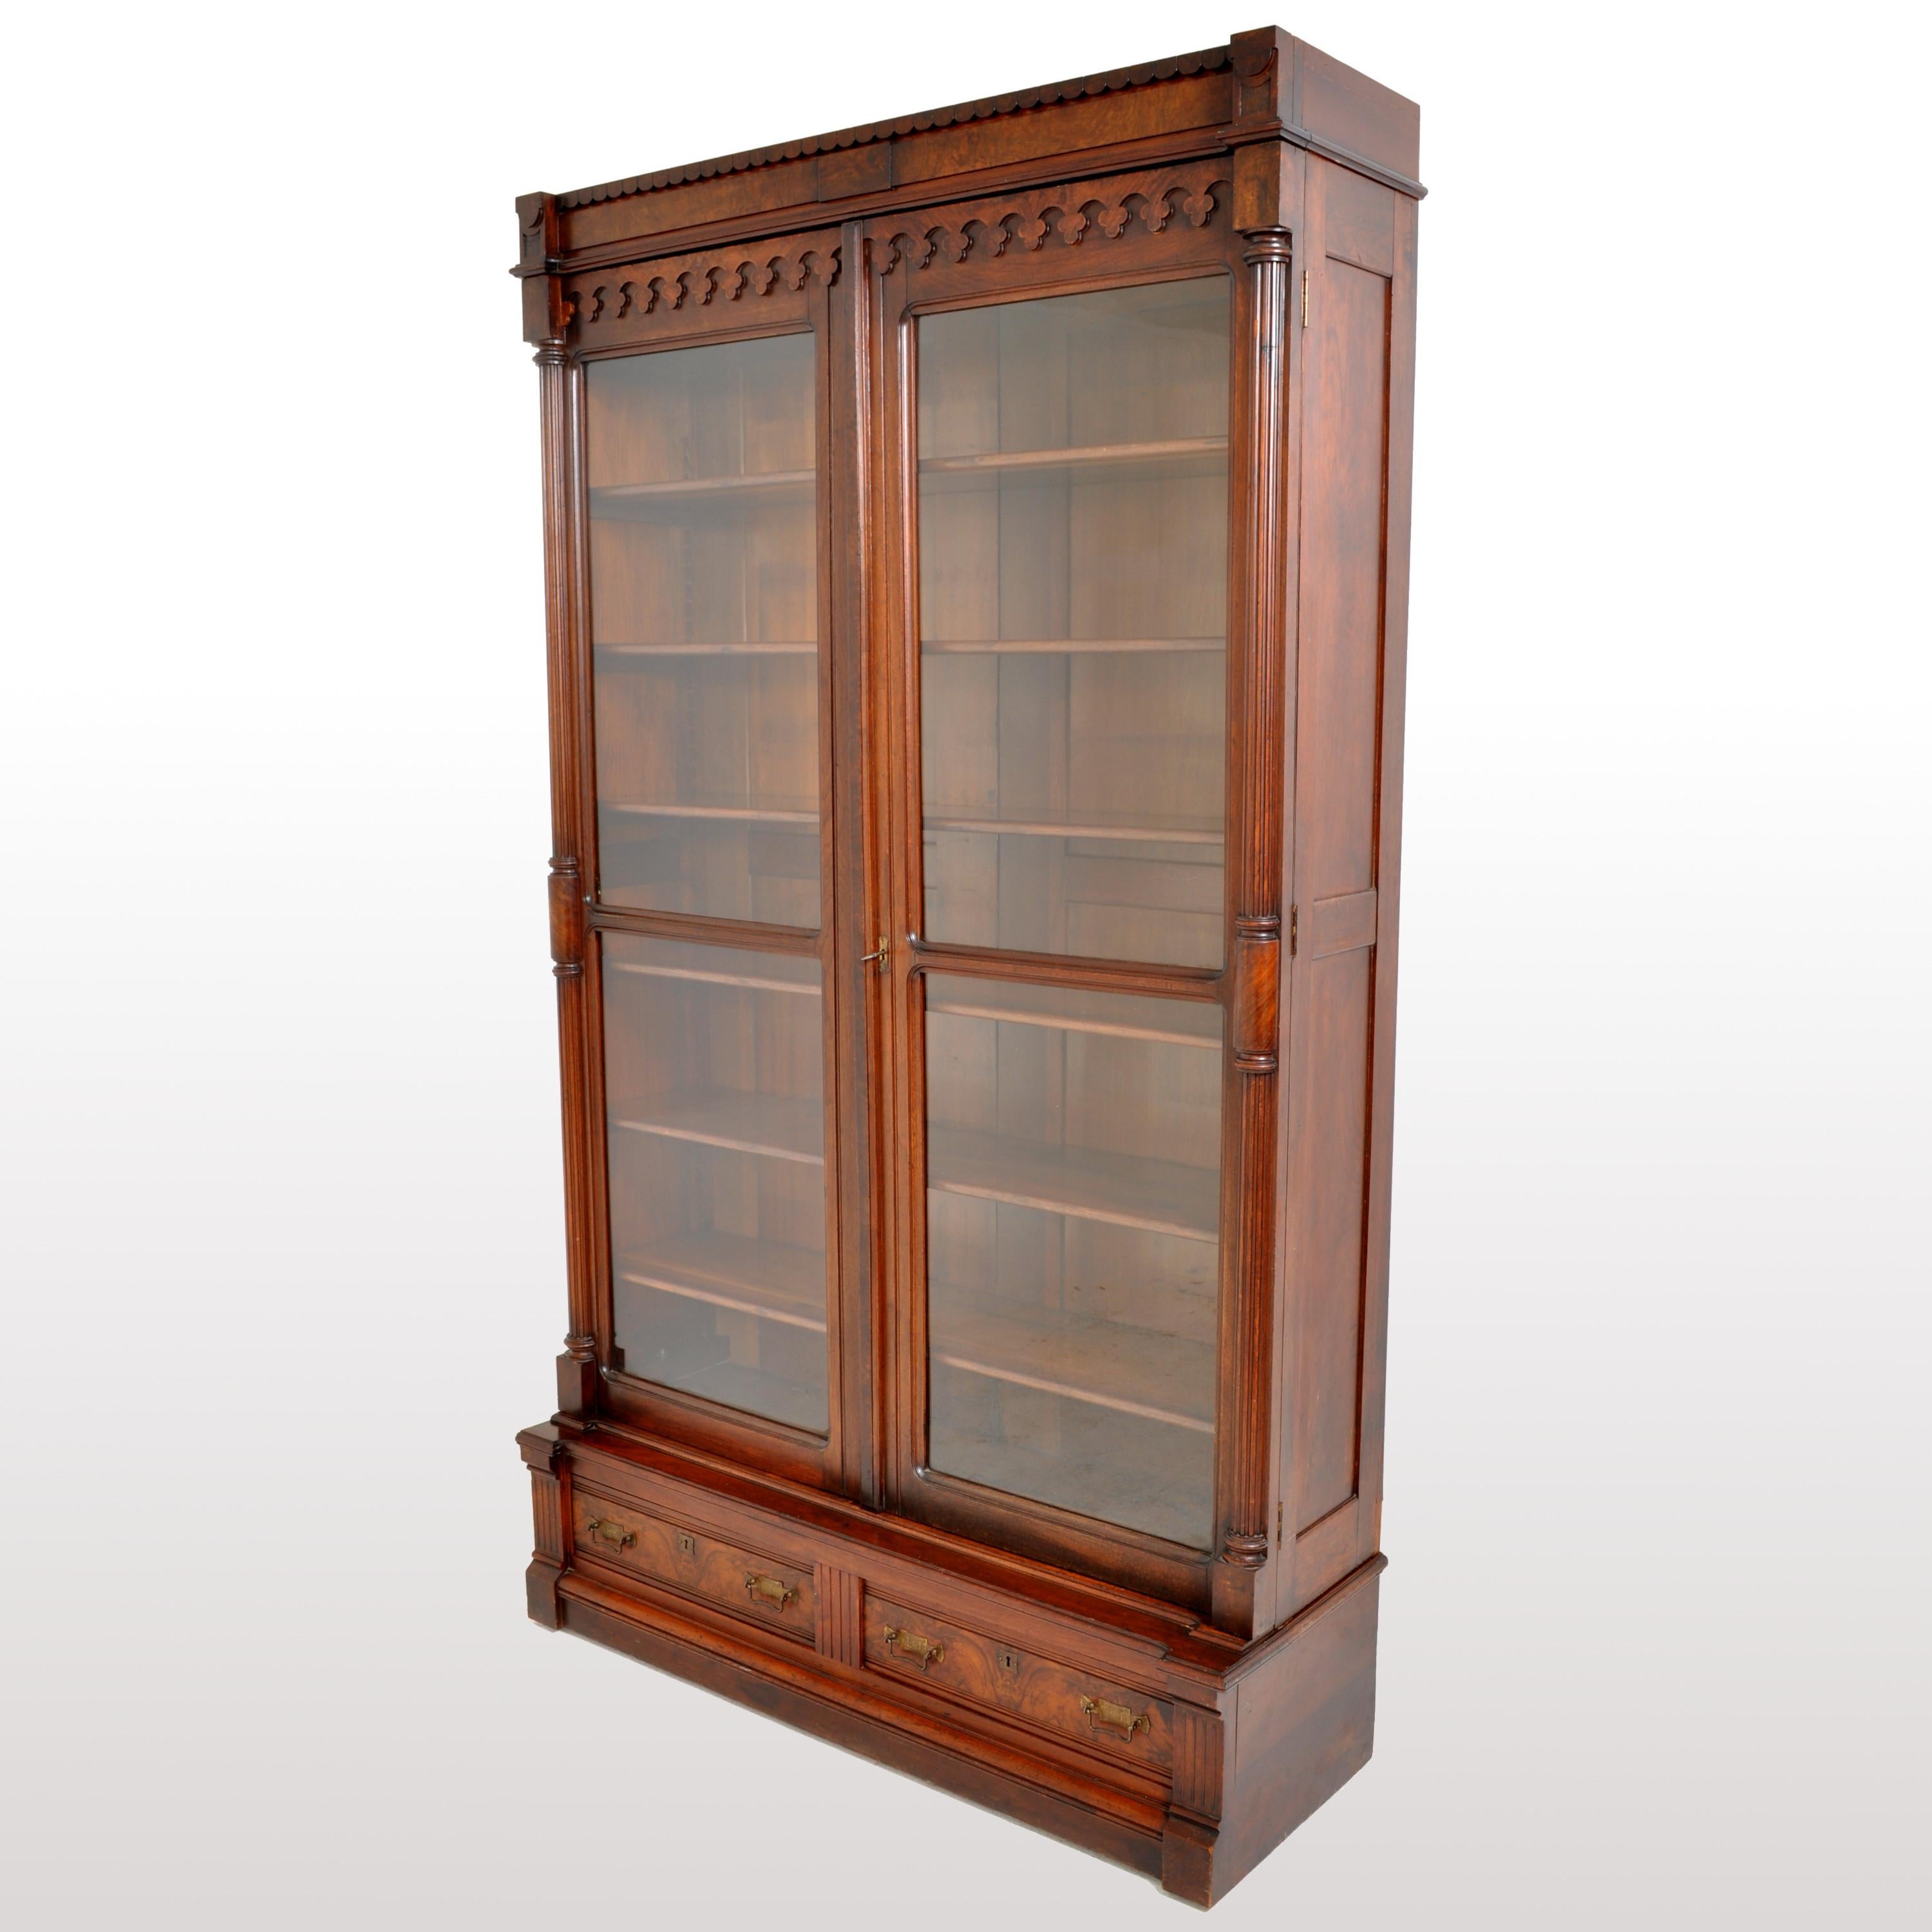 A fine antique American Eastlake/Renaissance Revival, tall, walnut and burl-walnut bookcase, circa 1875. The bookcase having a carved crown with a carved gallery below, the twin doors each having a full length ribbed and turned column. The doors